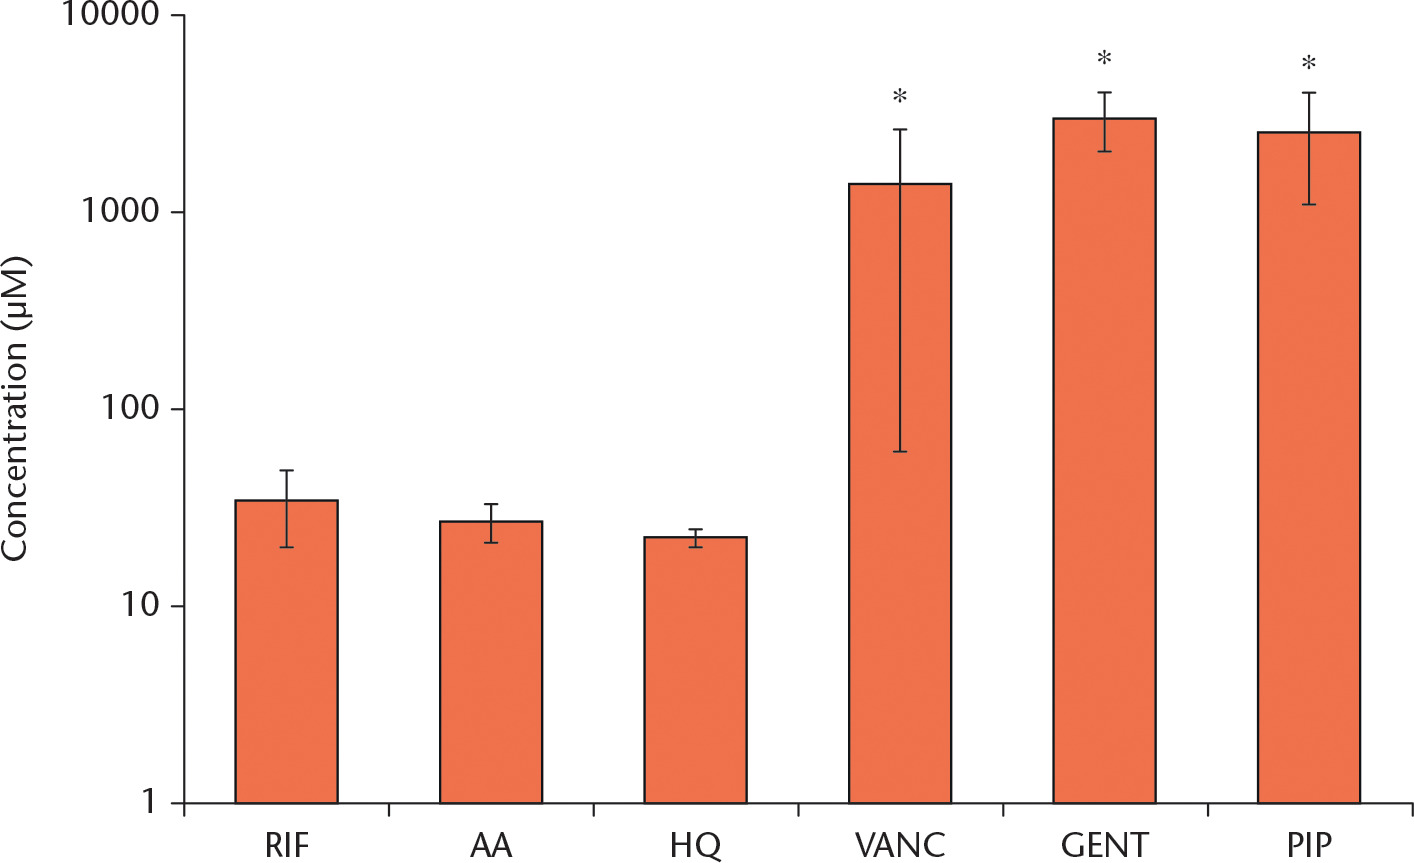 Fig. 5 
            Chart summarizing the computed EC50 results. An asterisk (*) denotes a significant difference from rifampin (RIF). Three specimens were tested from each group. AA, ascorbic acid; HQ, hydroquinone; VANC, vancomycin; GENT, gentamicin; PIP, 1-methylpiperazine.
          